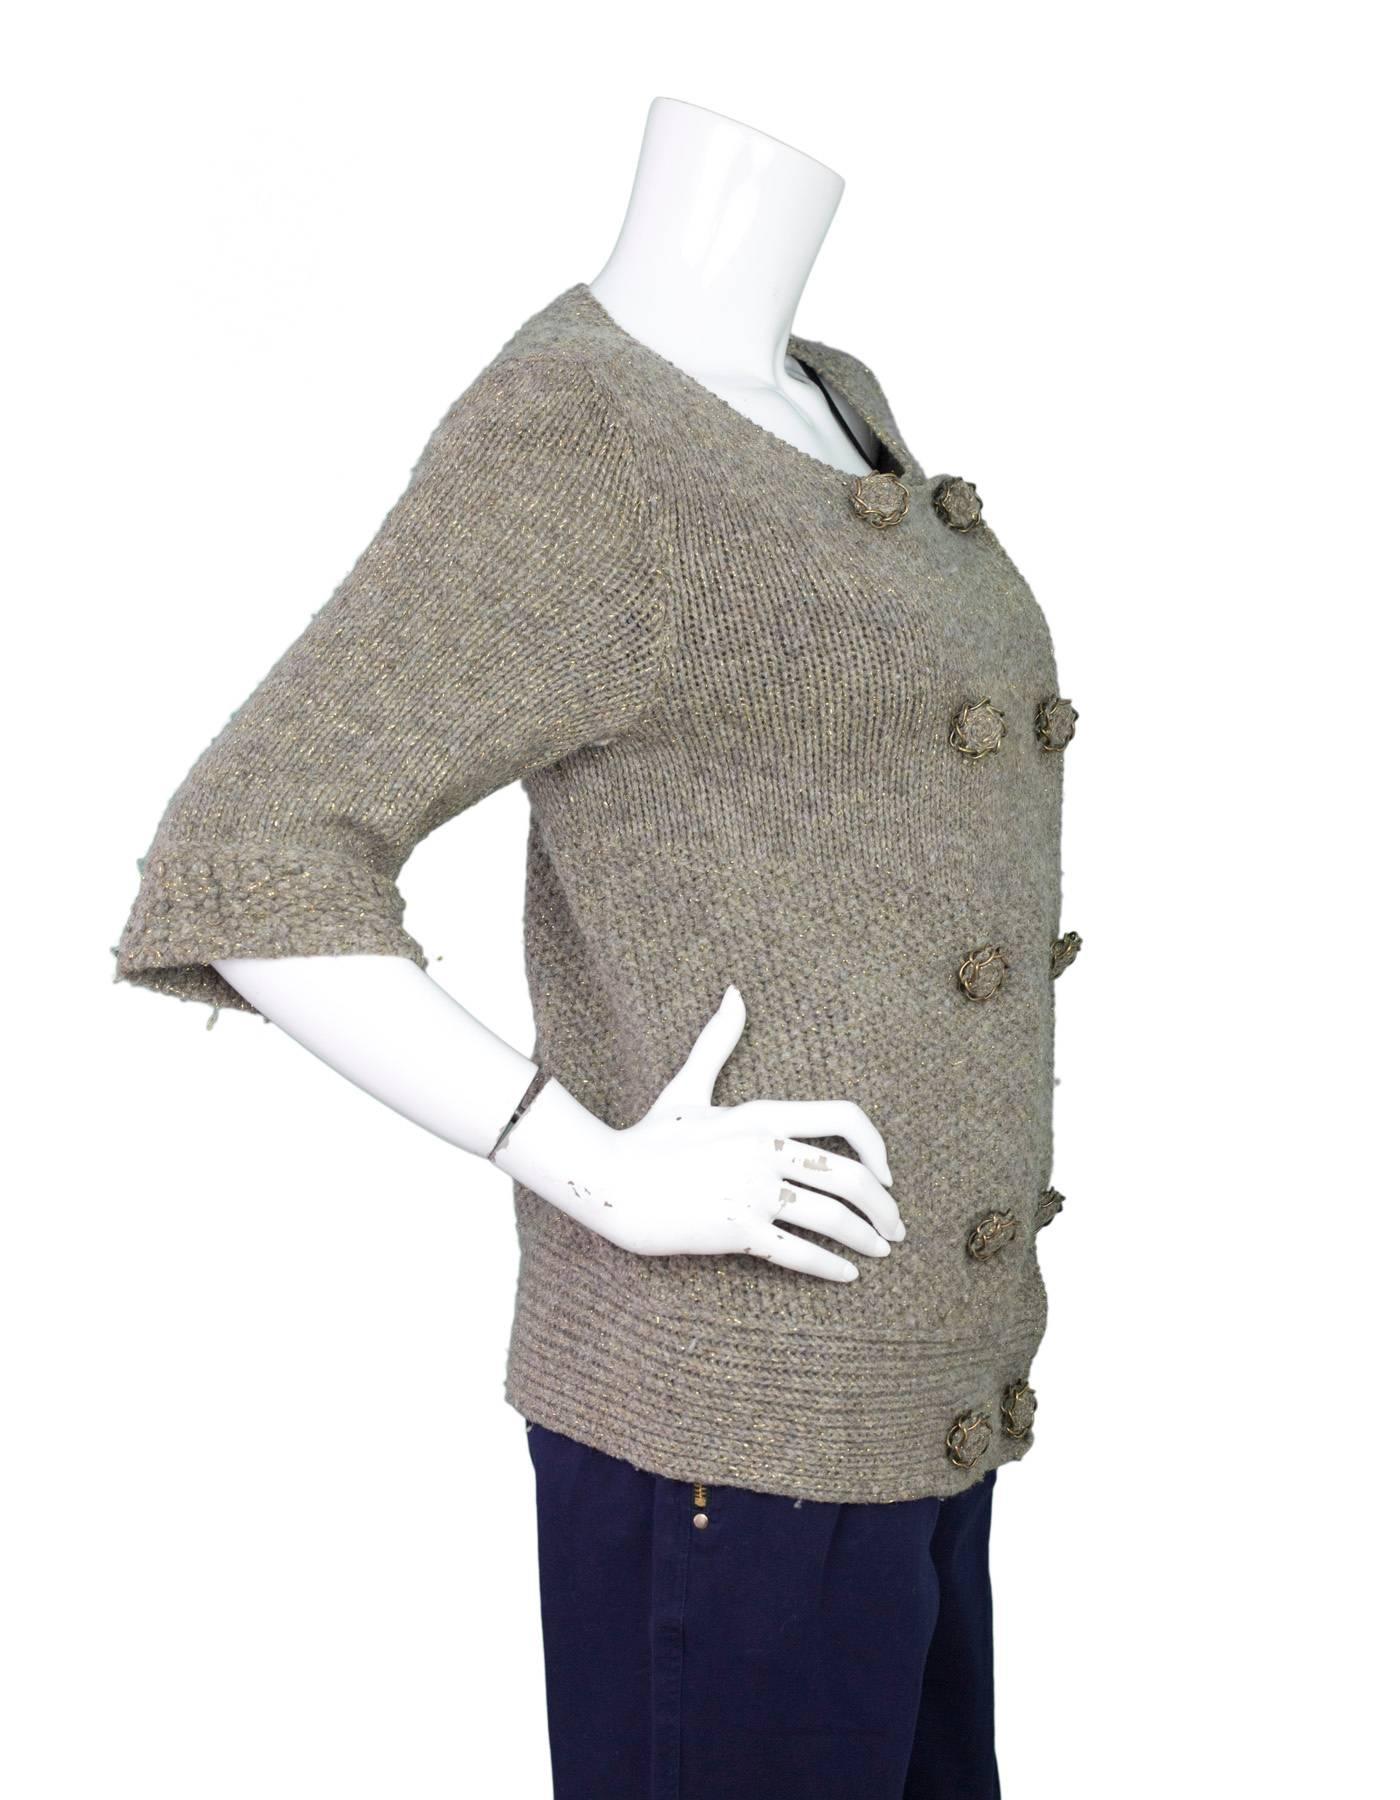 Louis Vuitton Metallic Taupe Wool Sweater 
Features chain link detailing on buttons 

Made In: Italy
Color: Taupe with metallic threading
Composition: 96% wool, 2% polyamide, 2% polyester
Lining: None
Closure/Opening: Double breasted snap button